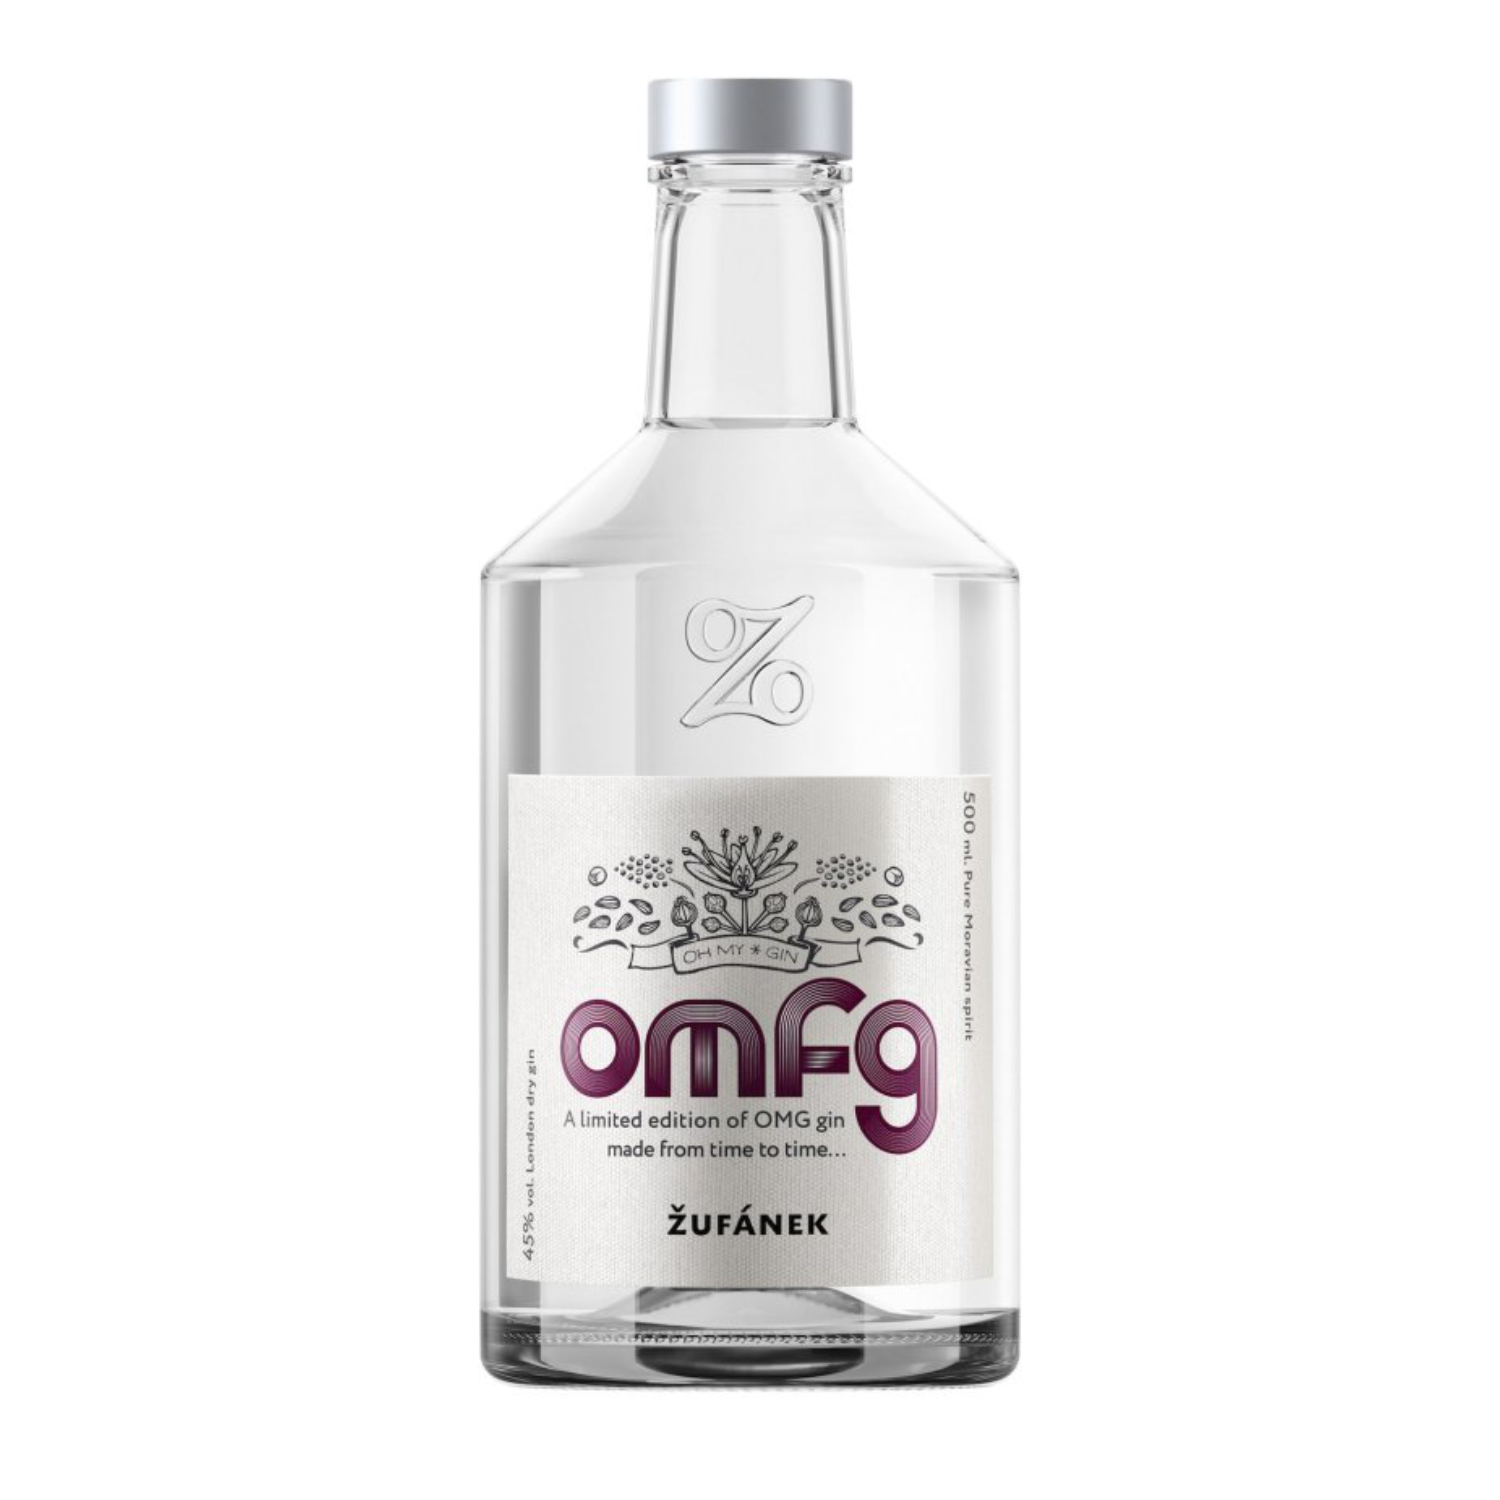 OMFG - Oh My F*** Gin Limited Edition 2022